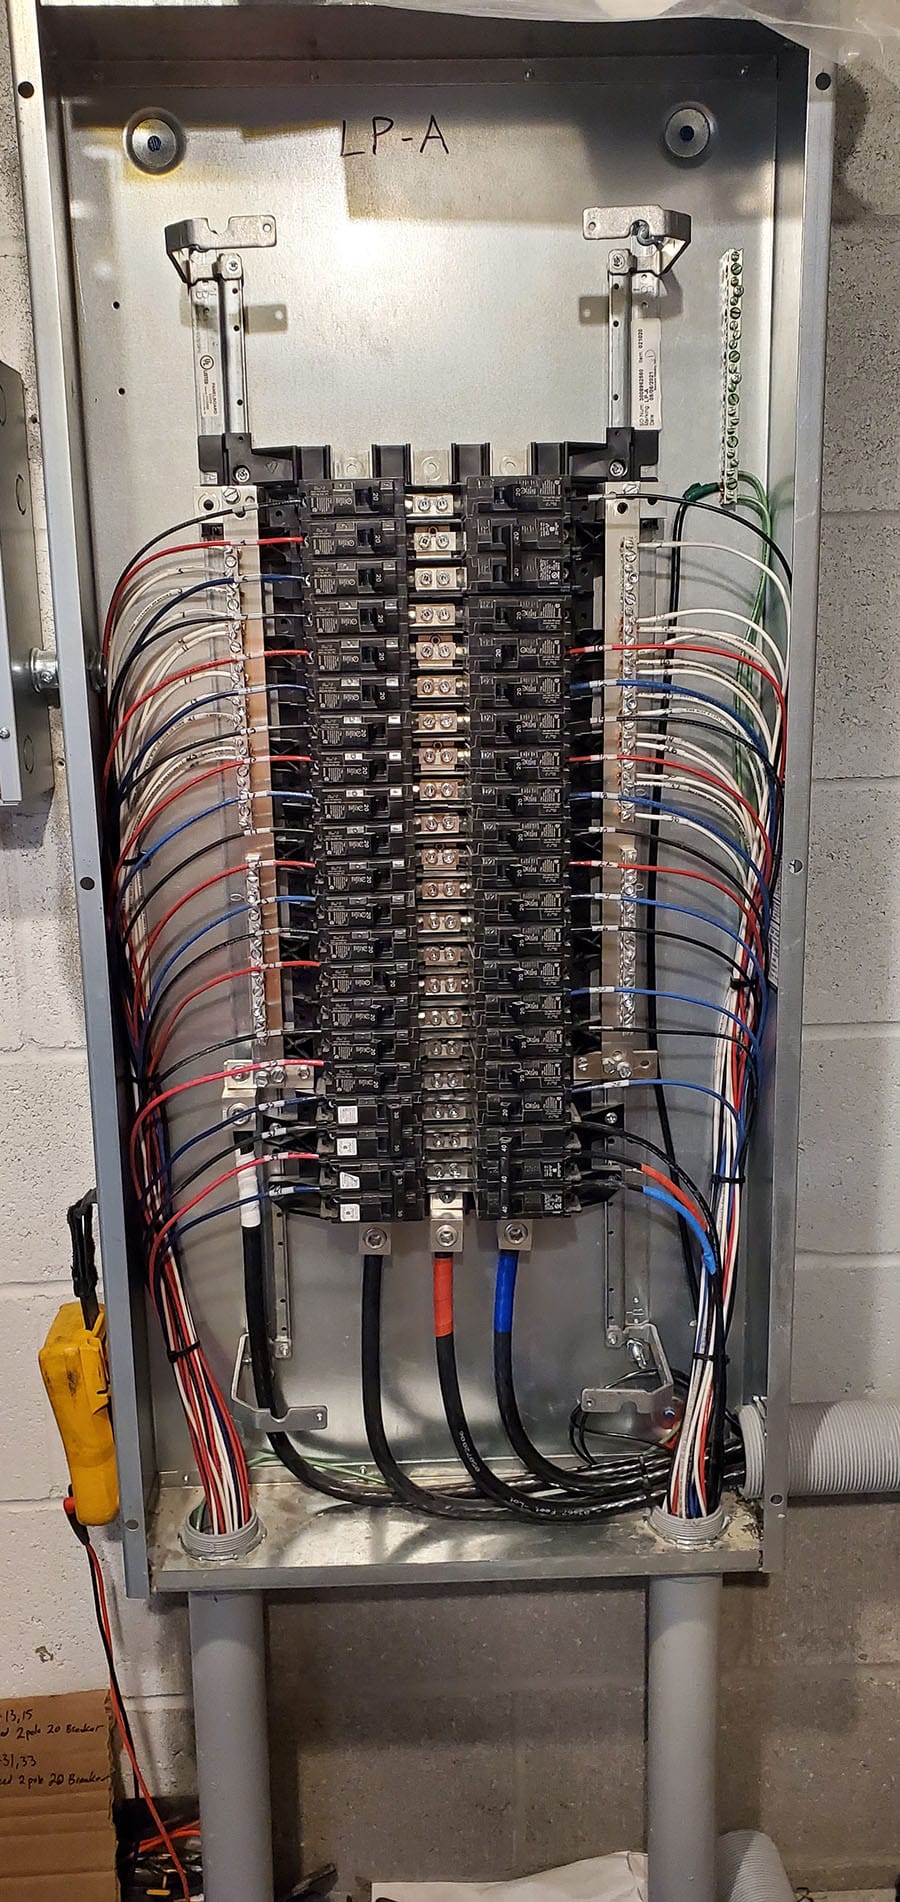 Certified transfer switch service in Indy